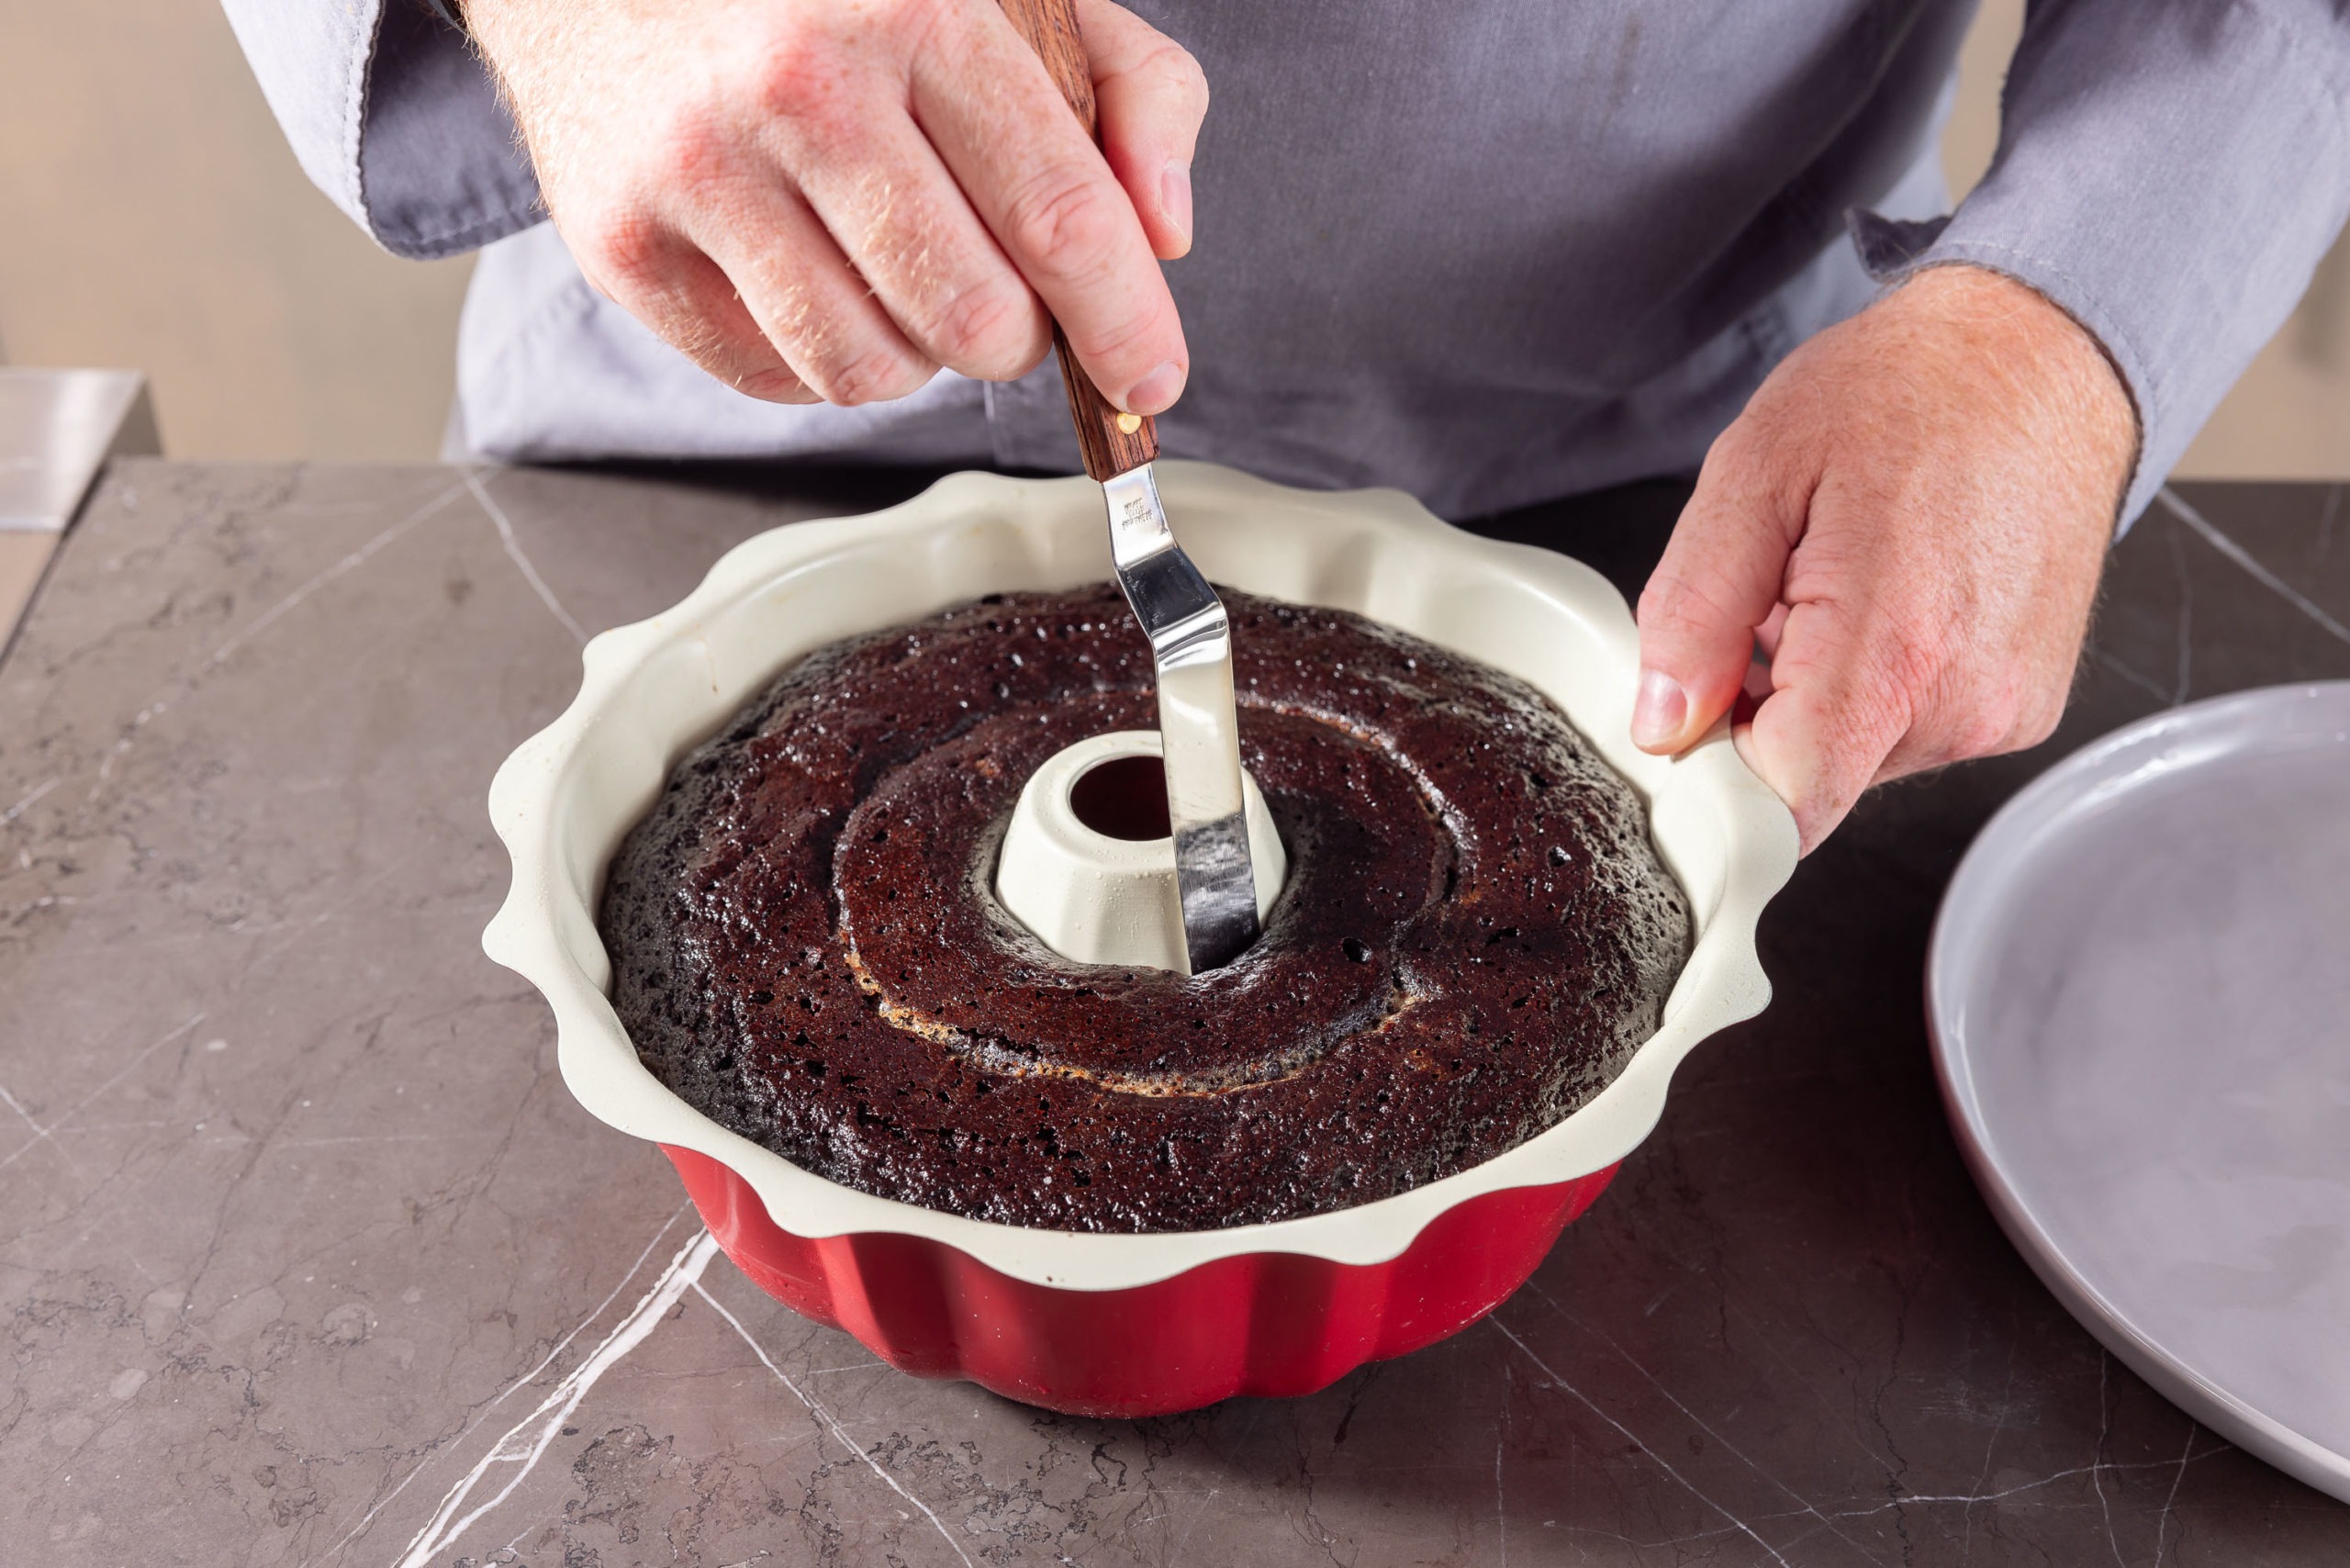 https://blog.thermoworks.com/wp-content/uploads/2022/08/85-Choco-flan-_-Thermapen-ONE-_-EBL-Timer-_-Mini-spatula_0224_compressed-scaled.jpg